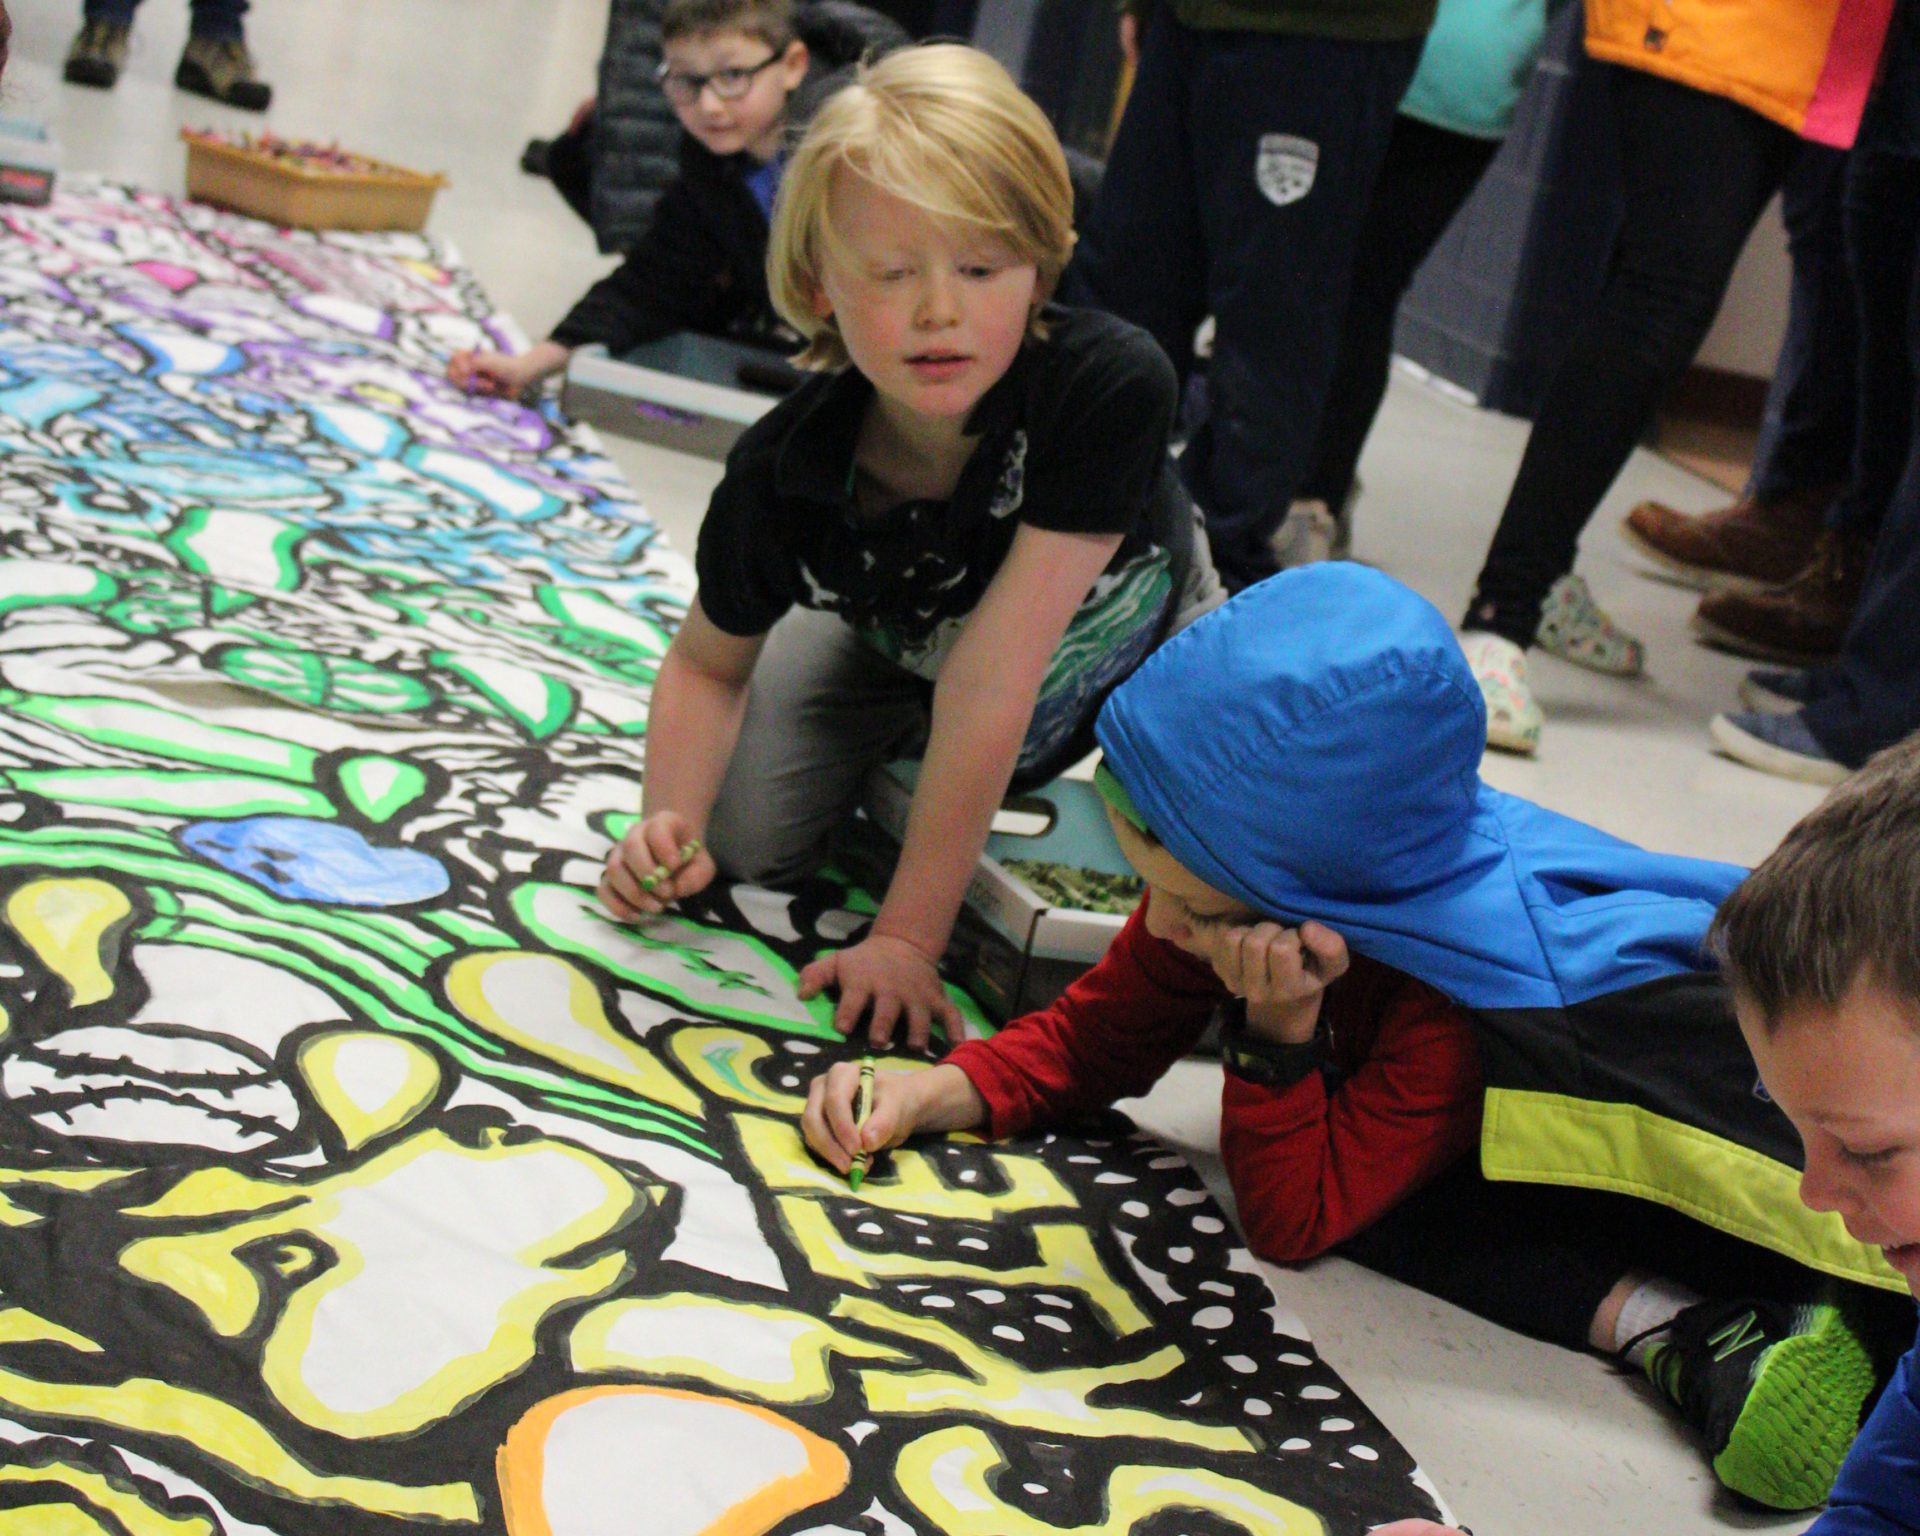 Students seated on the floor coloring in a large banner.